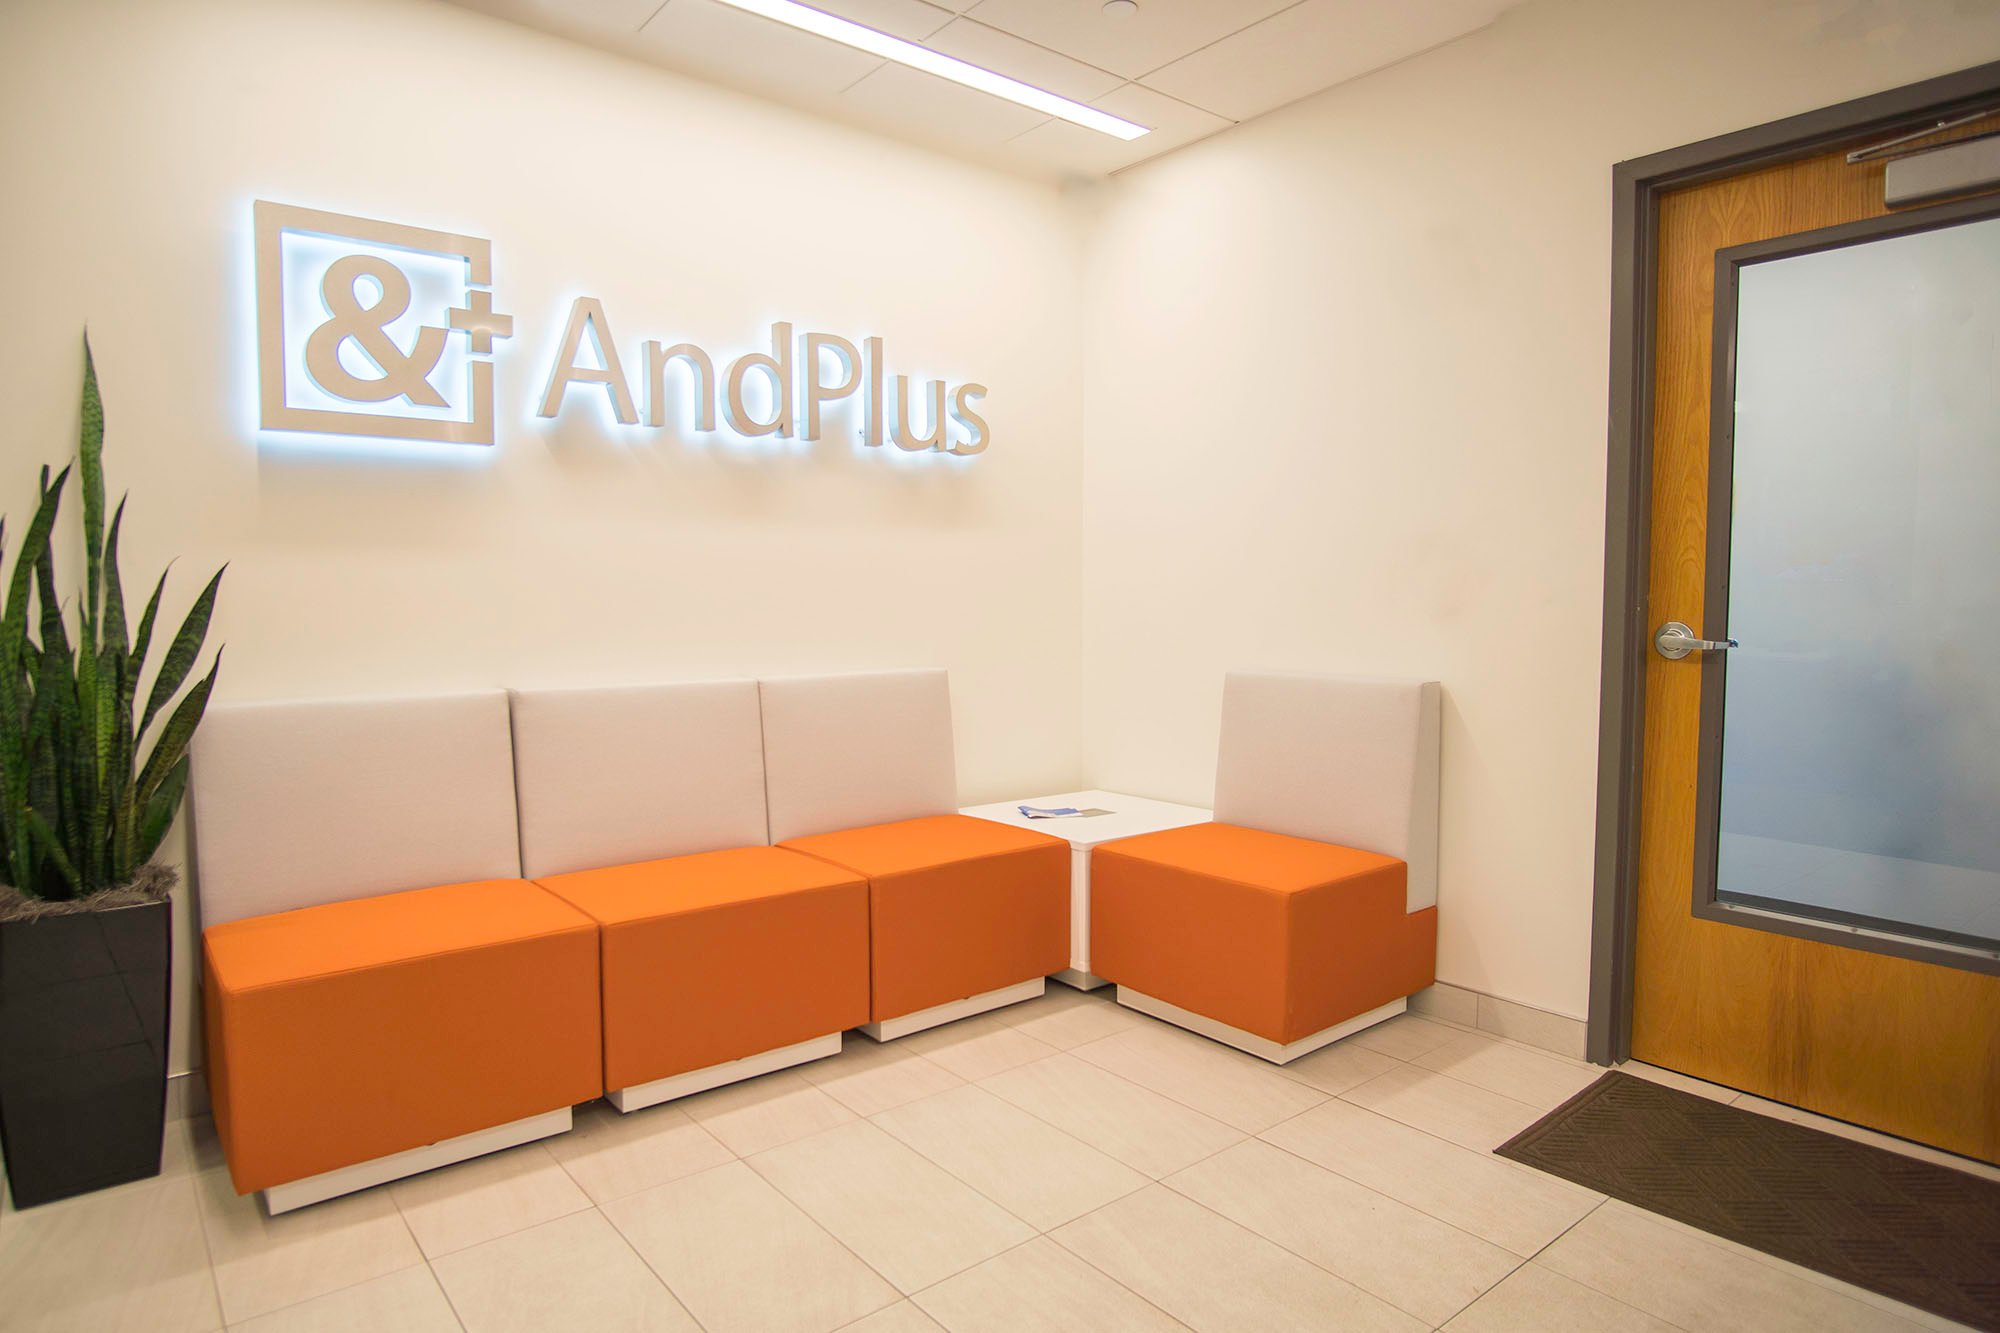 AndPlus is based just outside of Boston and proudly serves New England as a leading provider of innovation